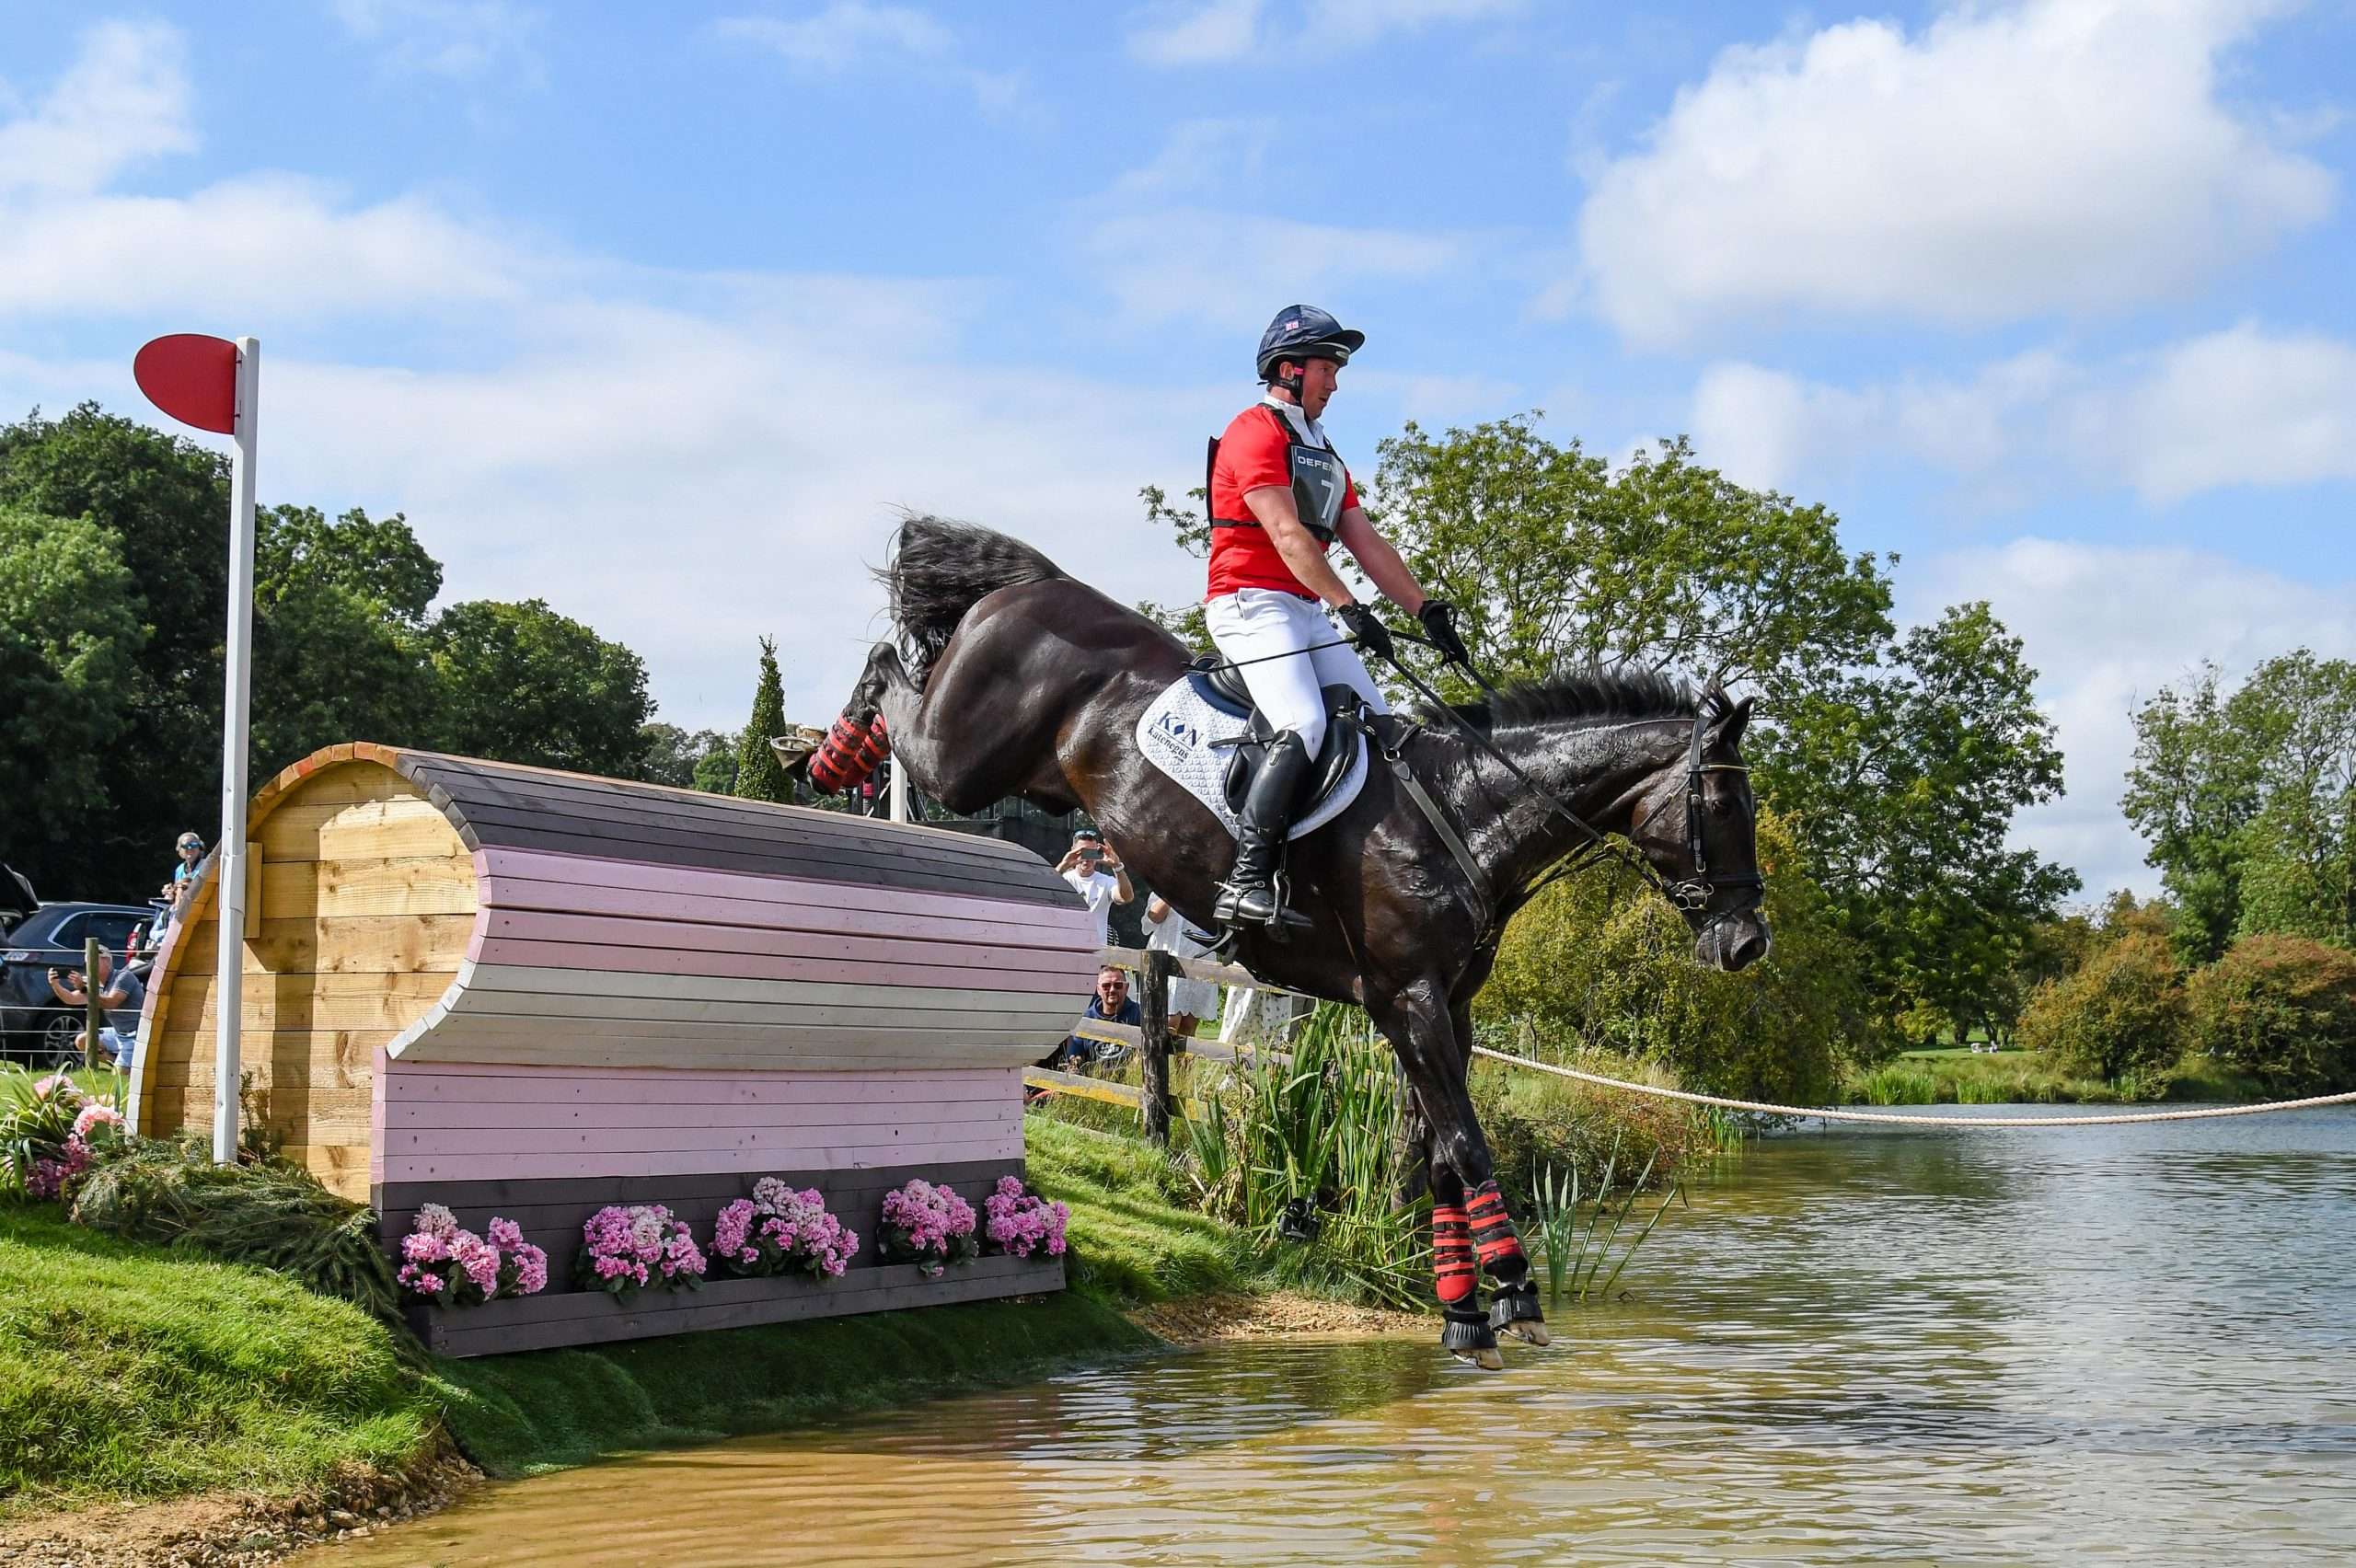 David Doel riding Galileo Nieuwmoed for GBR during the cross country phase at the Defender Burghley Horse Trials